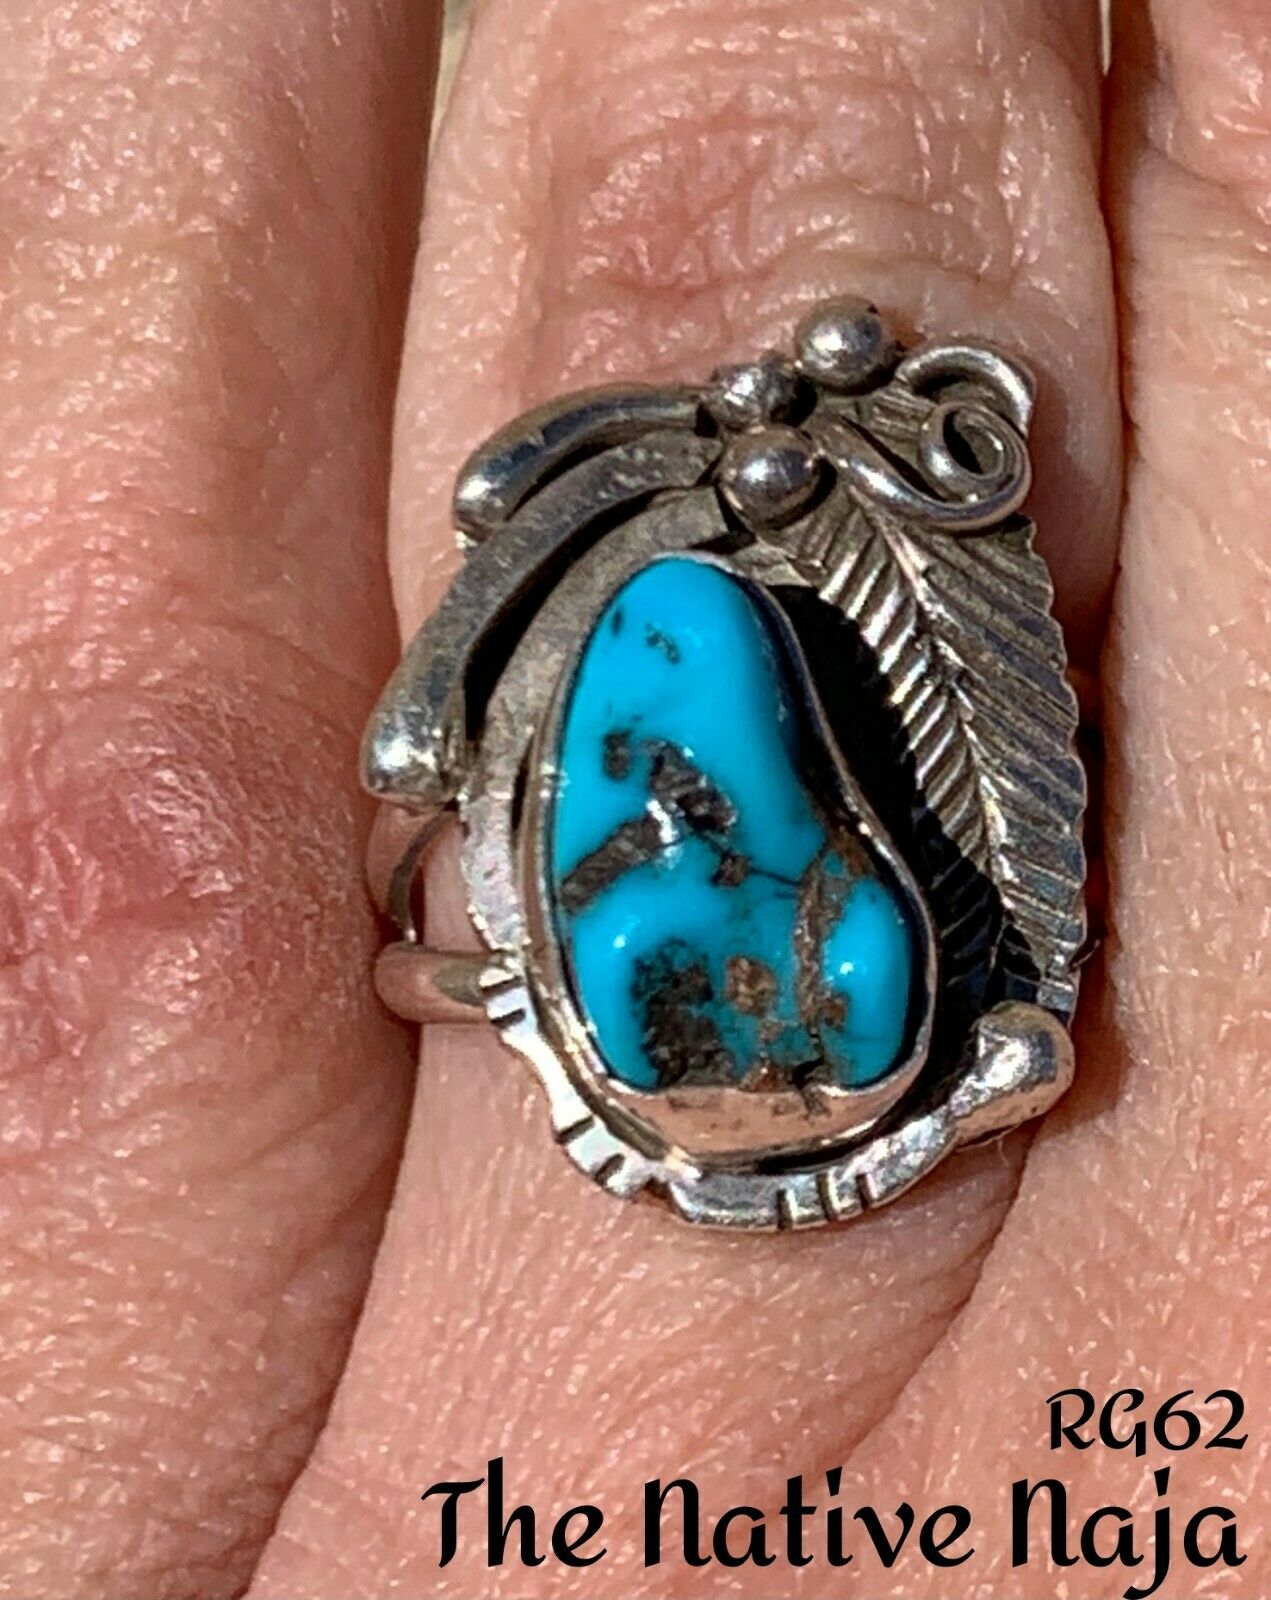 Navajo Signed Sterling Silver & Rare Sleeping Beauty Turquoise Ring Size 6 1/4 RG62